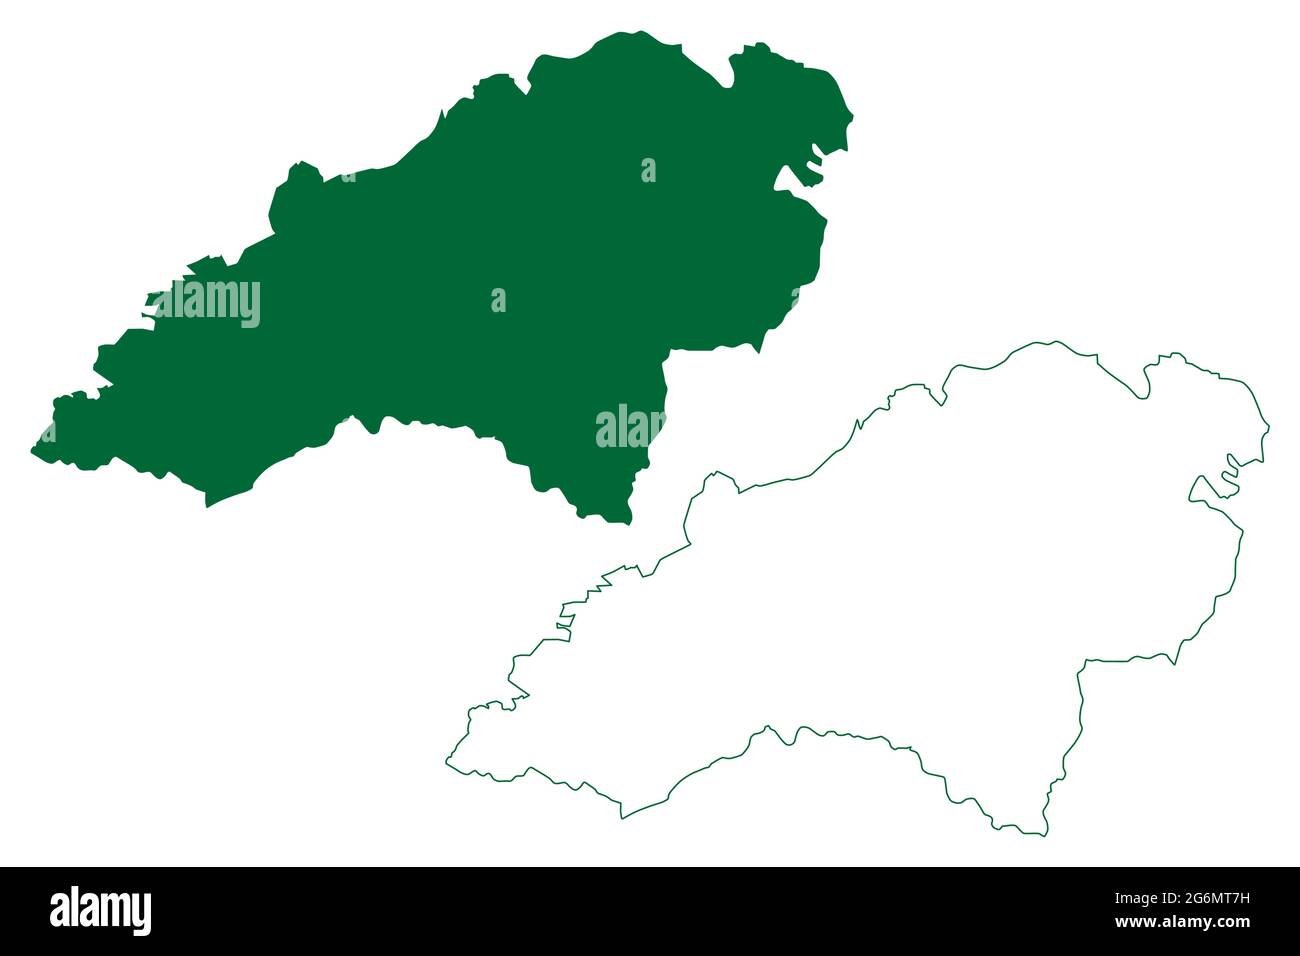 Firozpur district (Punjab State, Republic of India) map vector illustration, scribble sketch Ferozepur map Stock Vector